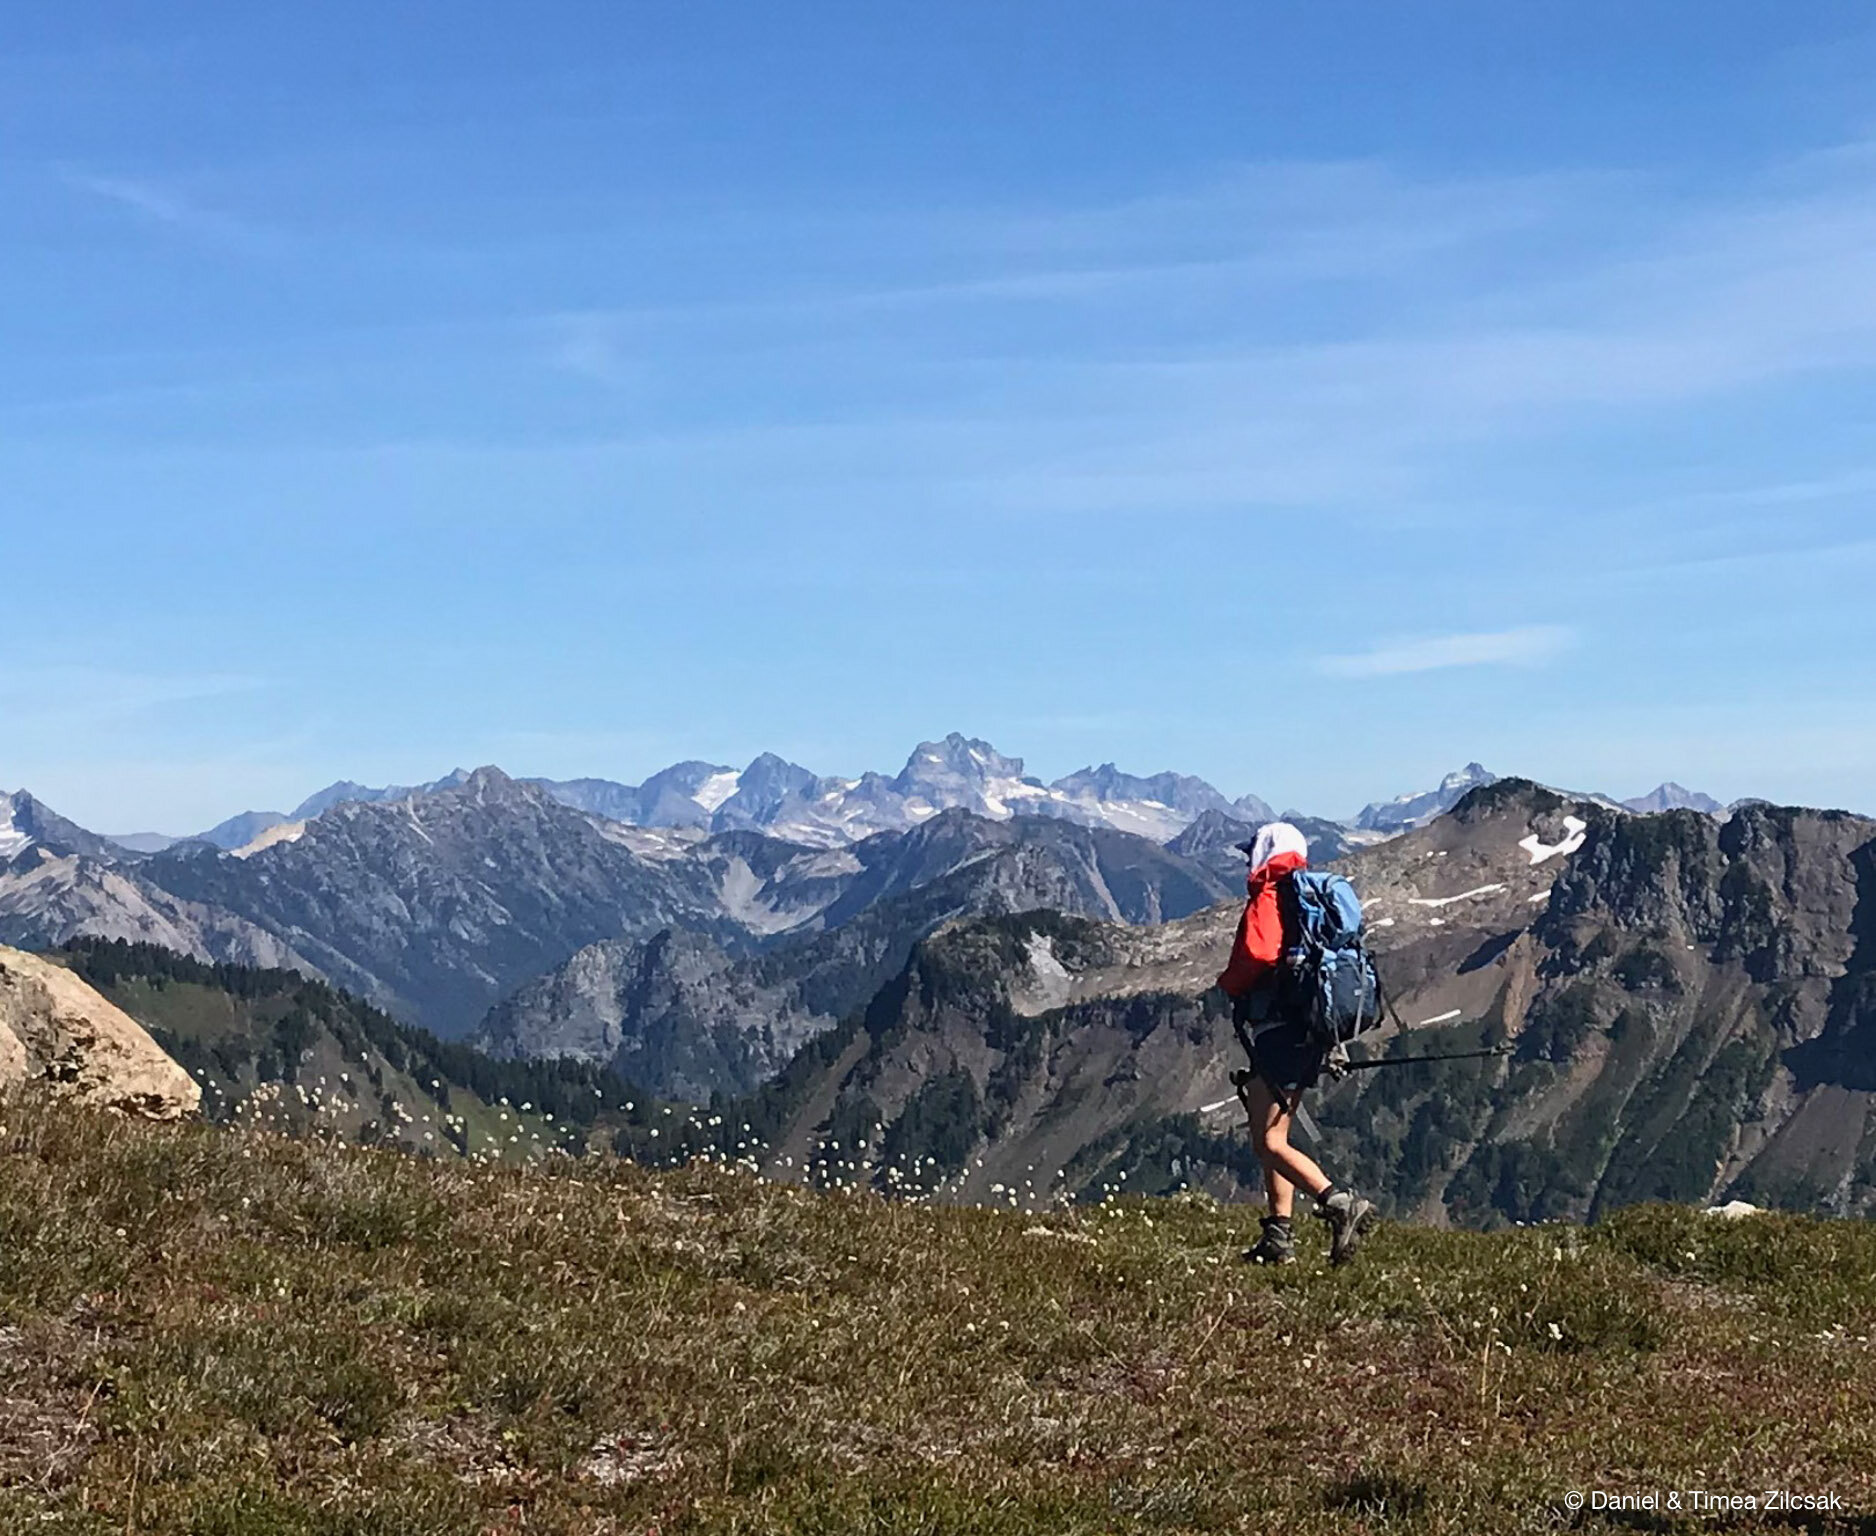 Backpacking in the North Cascades mountains